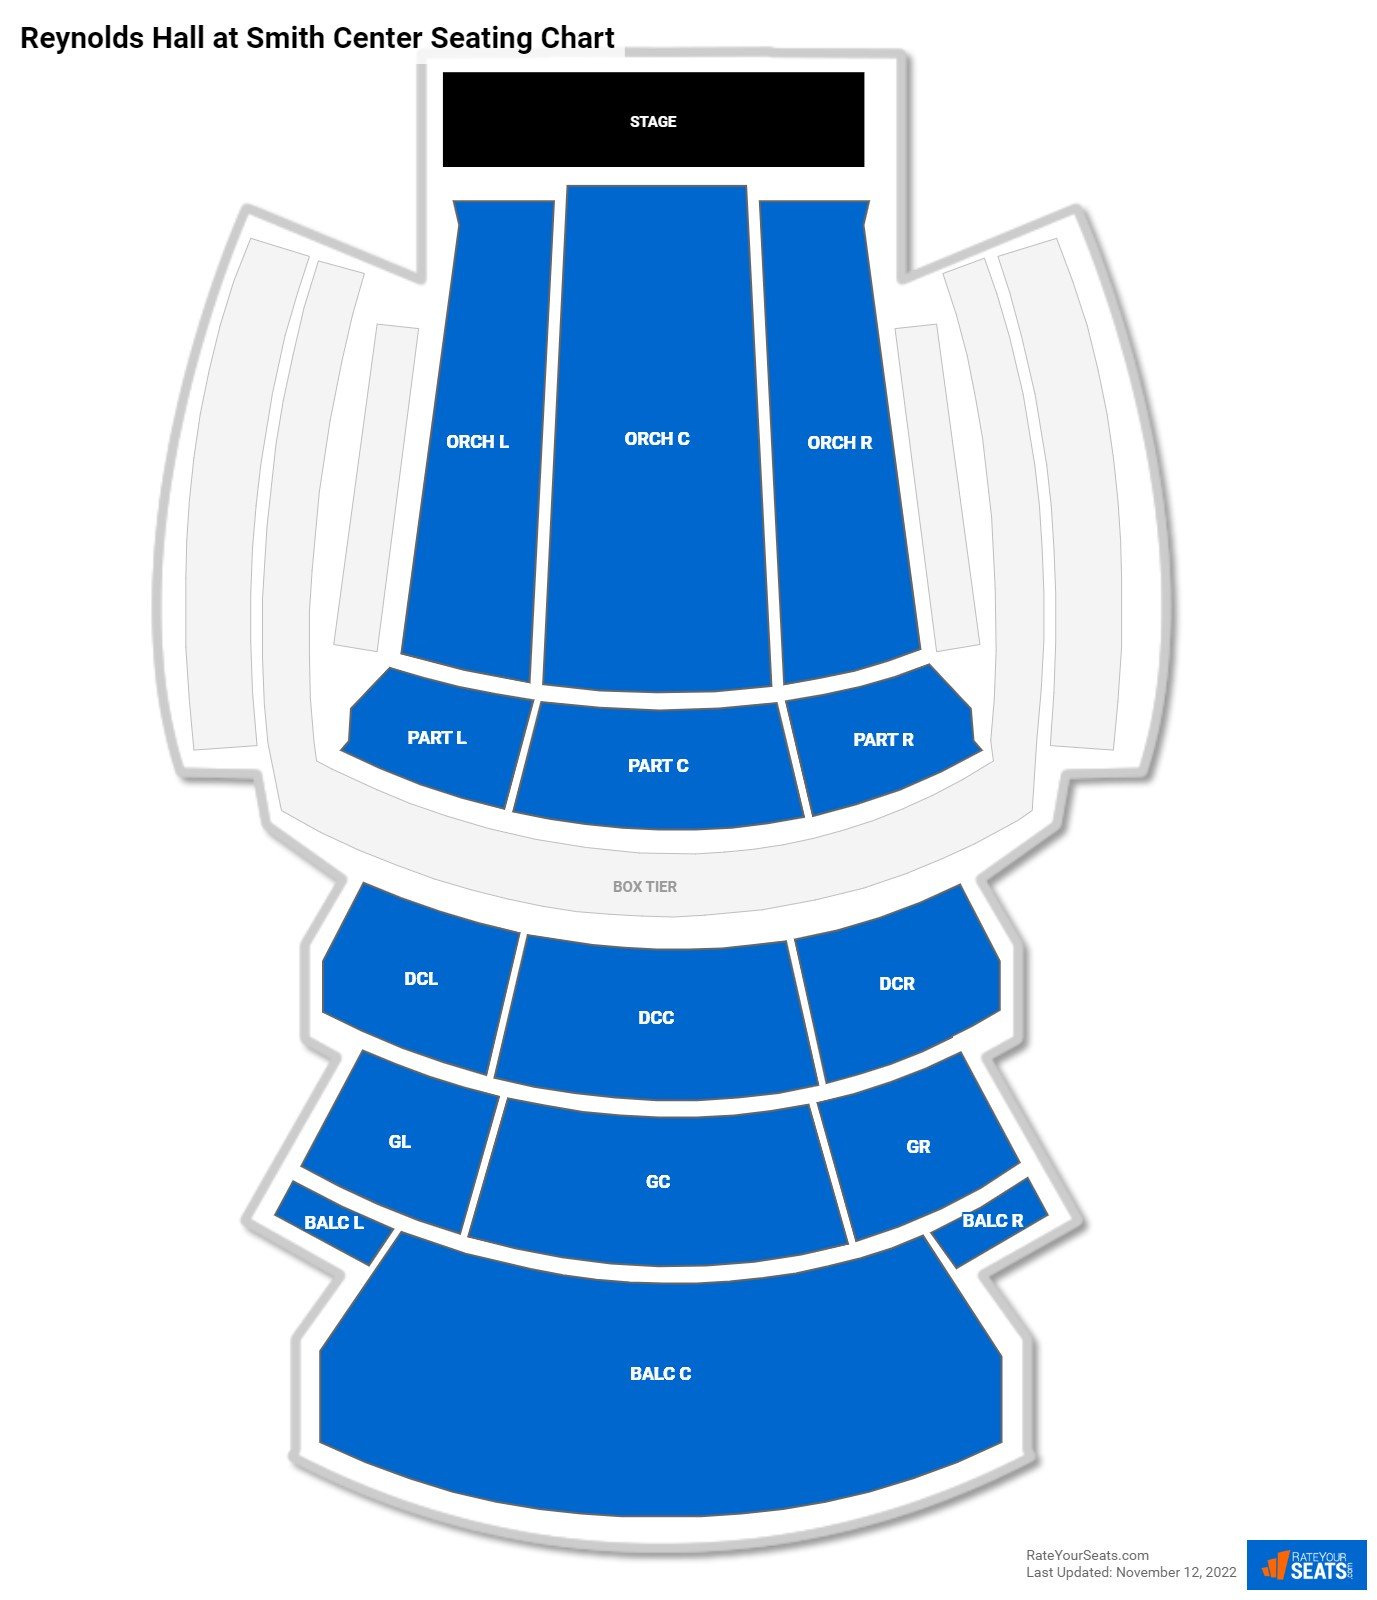 Reynolds Hall at Smith Center Theater Seating Chart